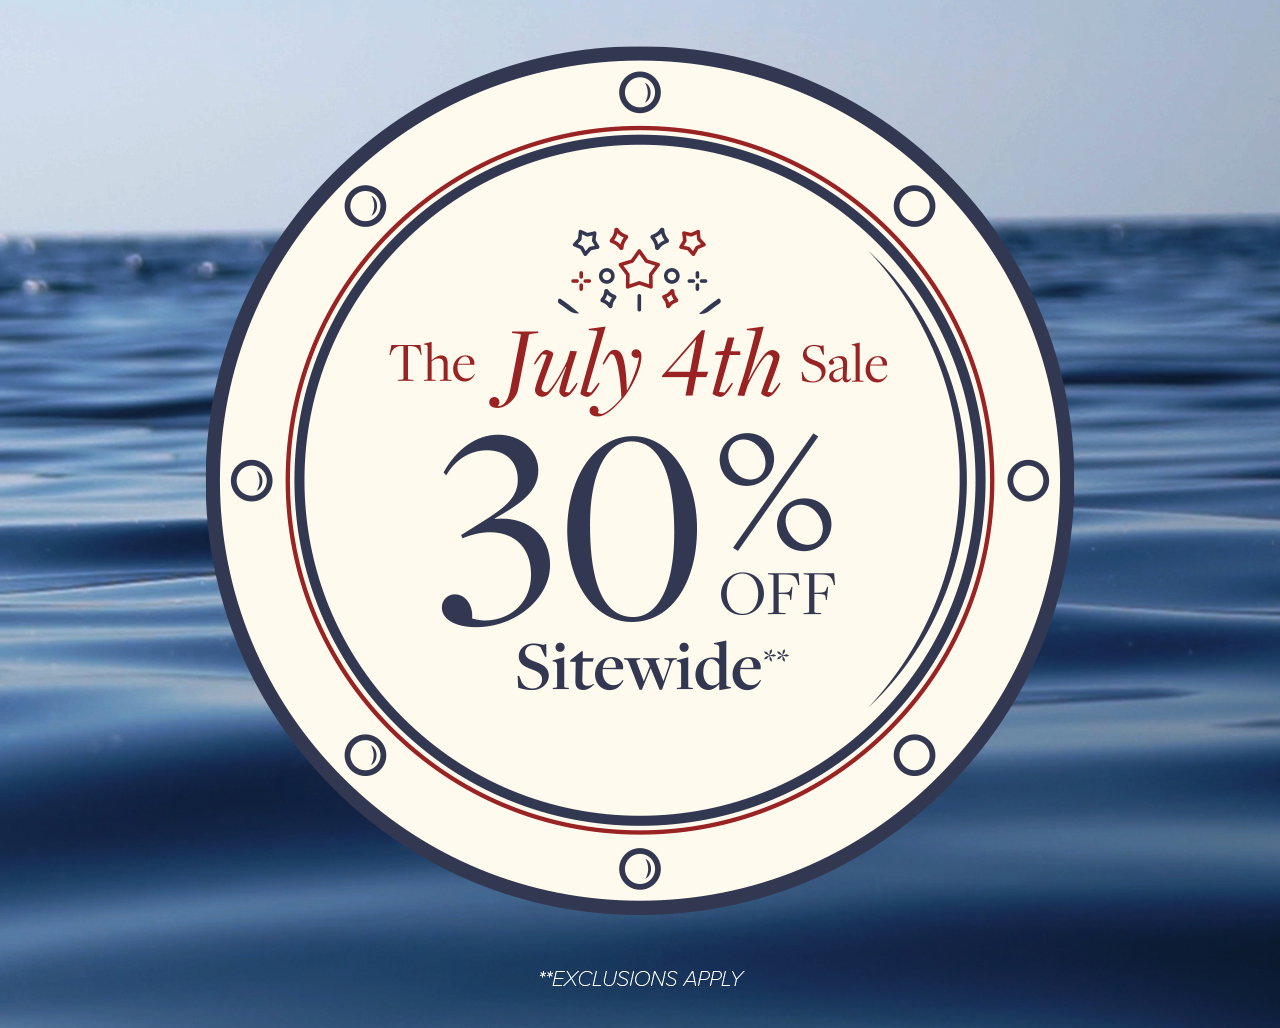 The July 4th Sale 30% Off Sitewide